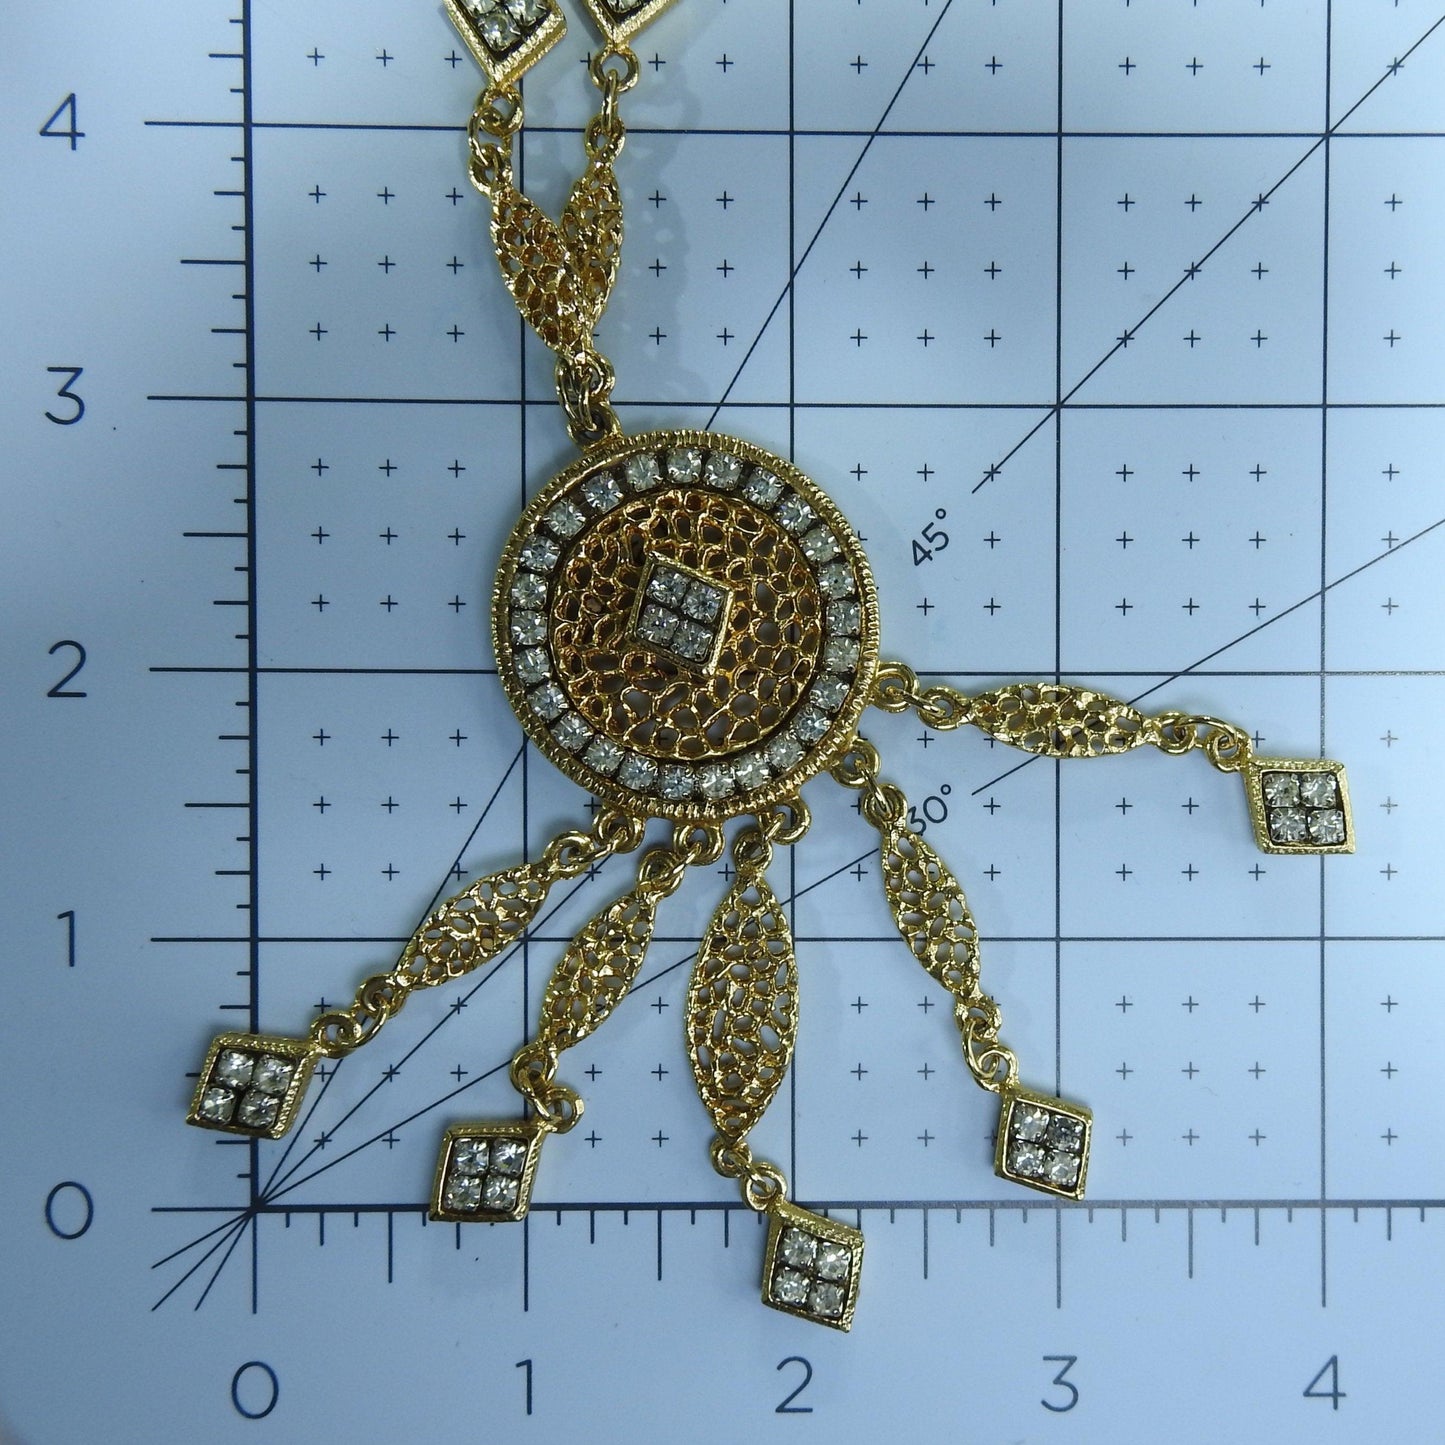 Vintage long gold pendant necklace with glass rhinestone, for business or evening wear and cocktail party.